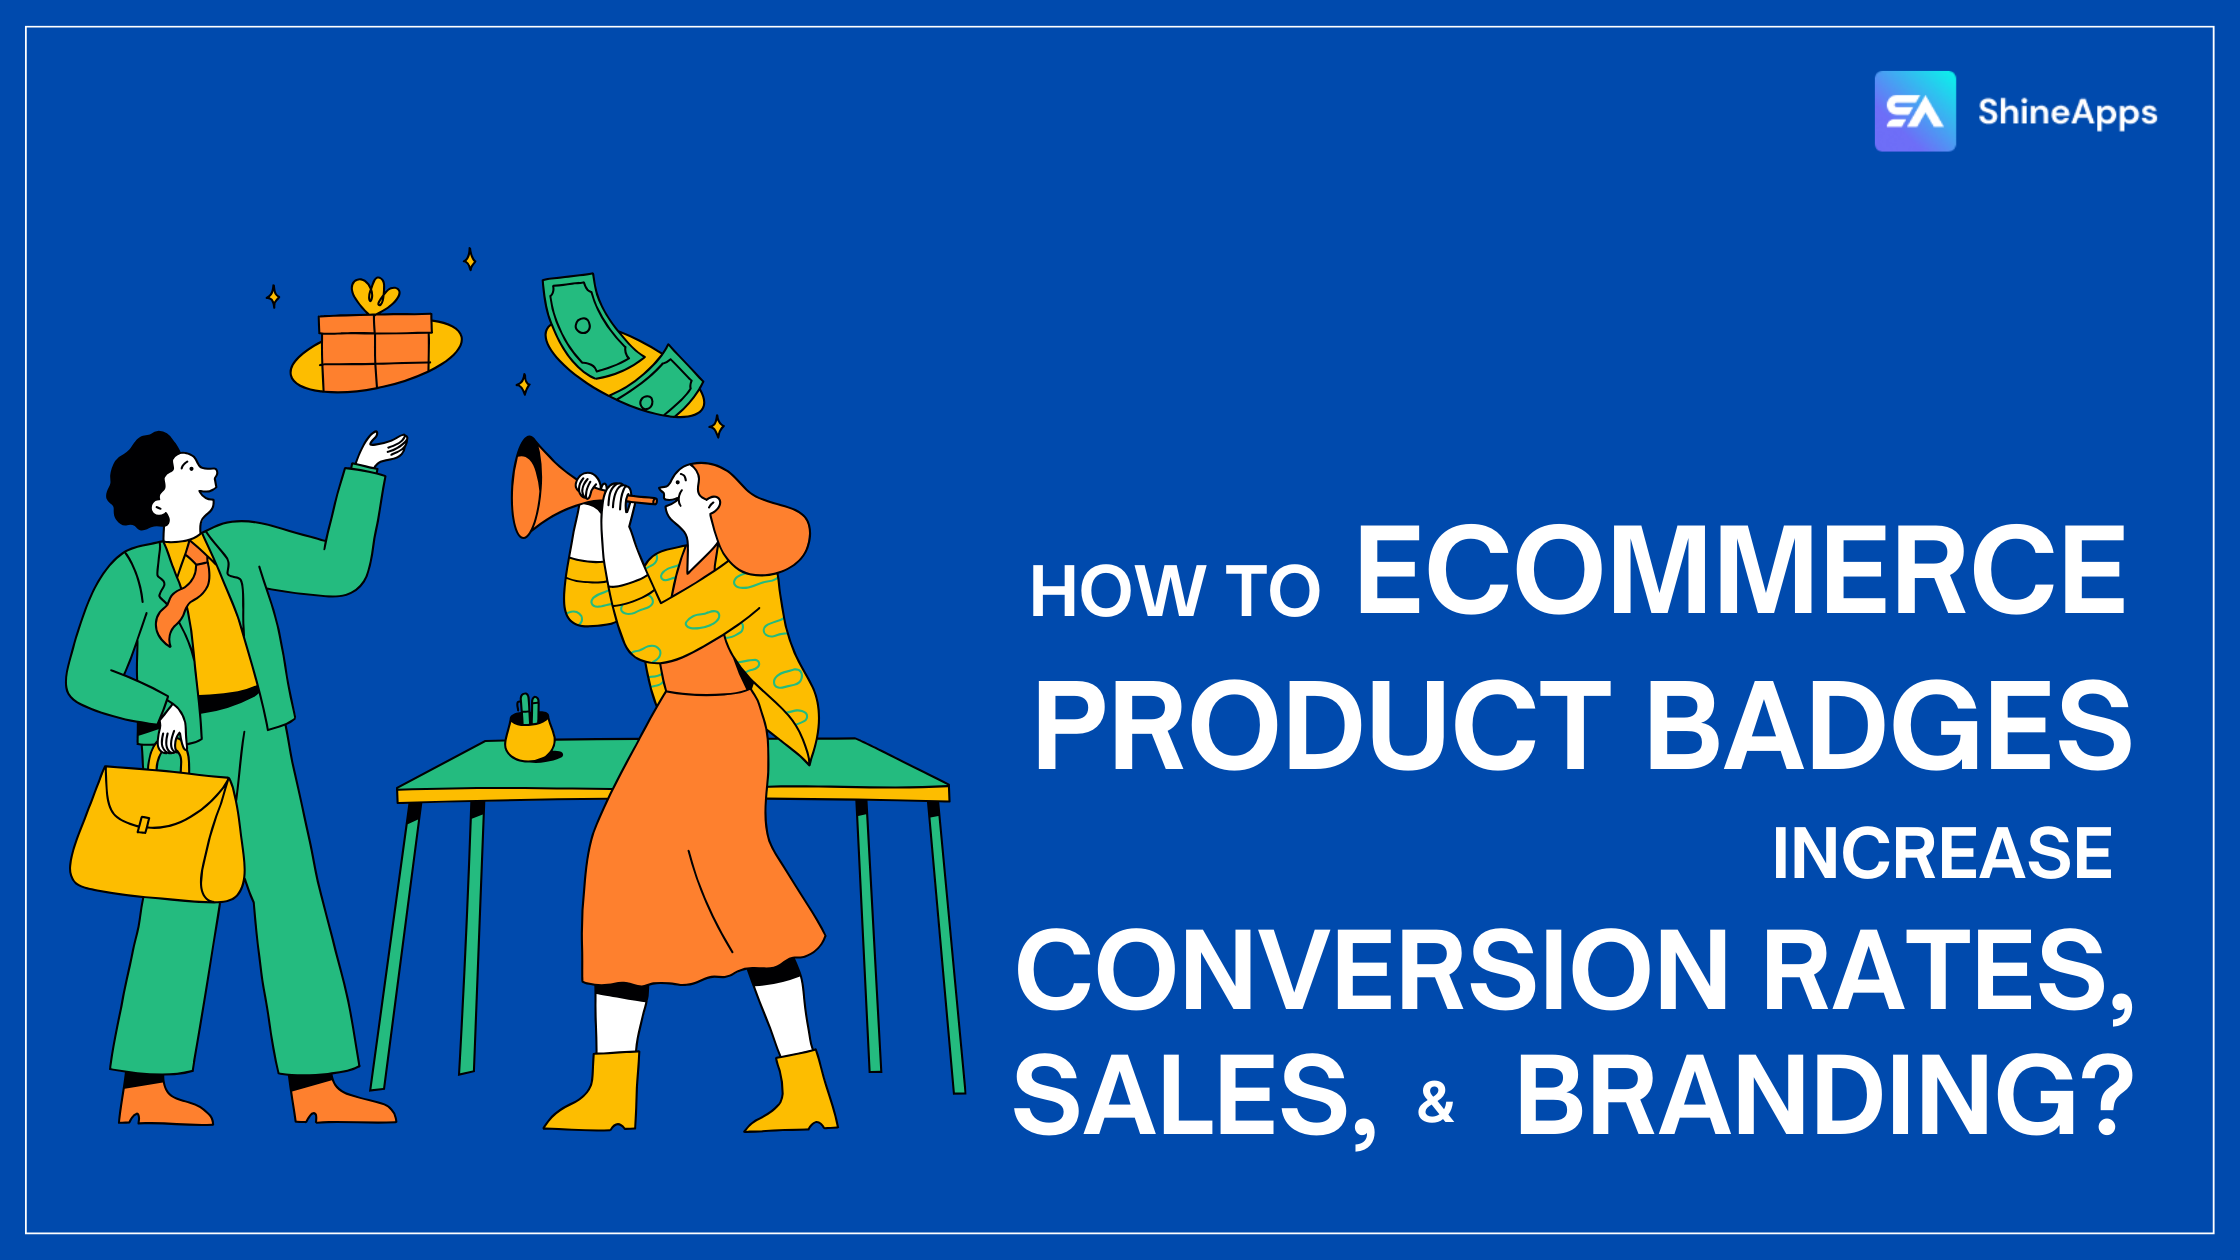 How do eCommerce product badges increase conversion rates, sales, and branding?